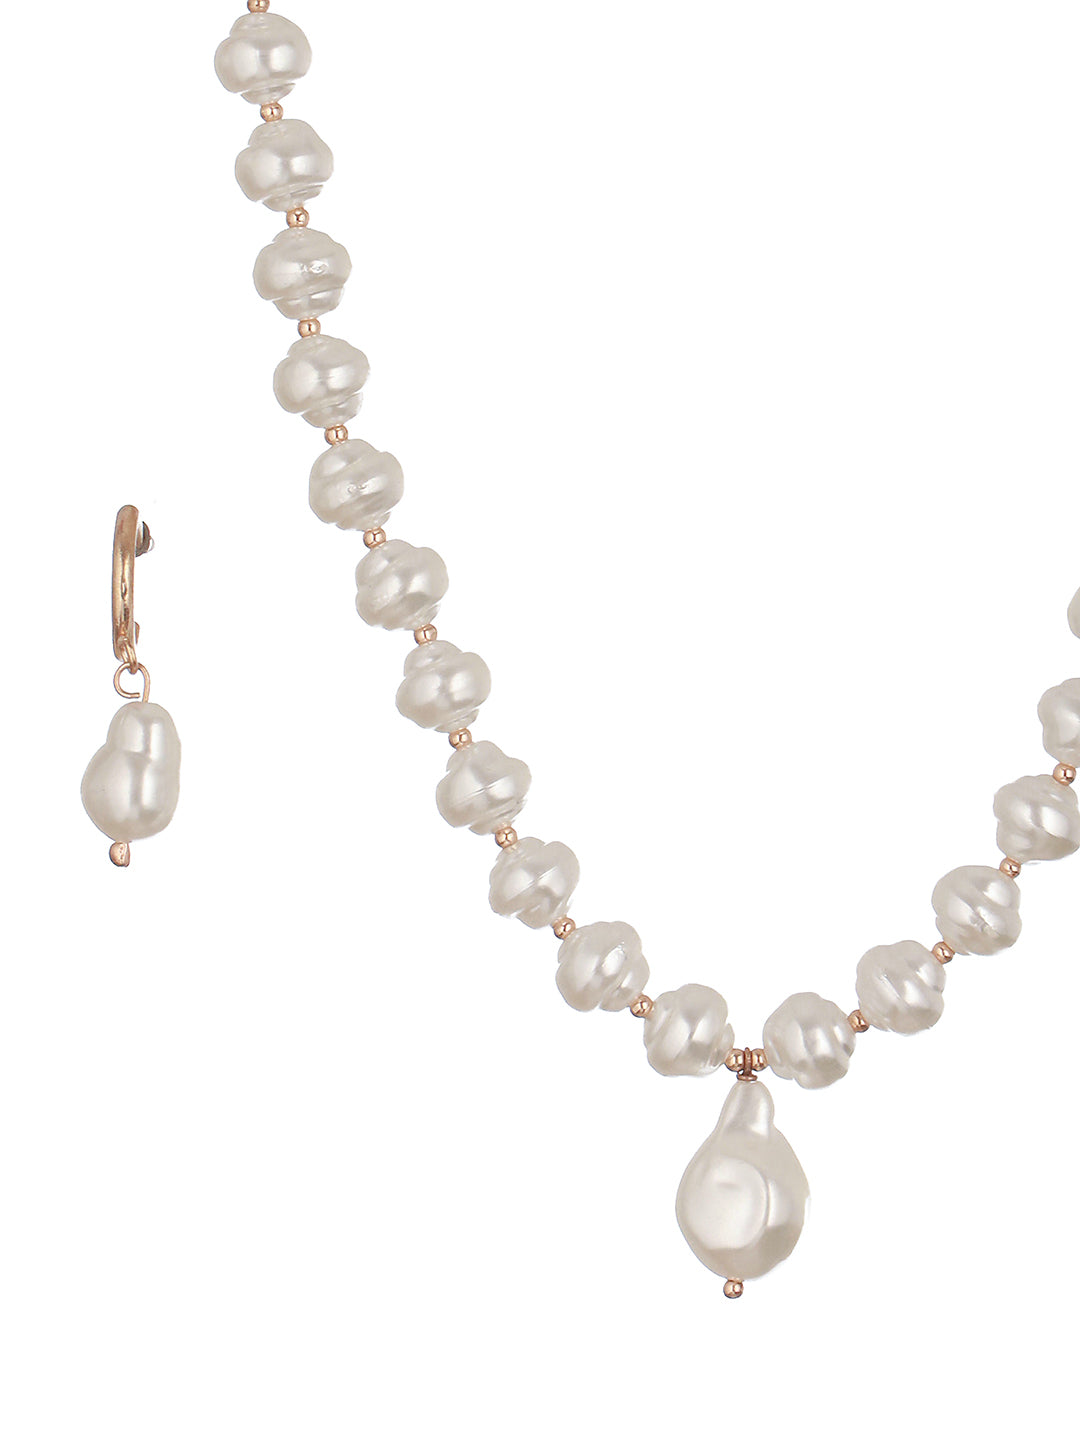 White & Gold-Toned Pearls Choker Necklace with Earrings